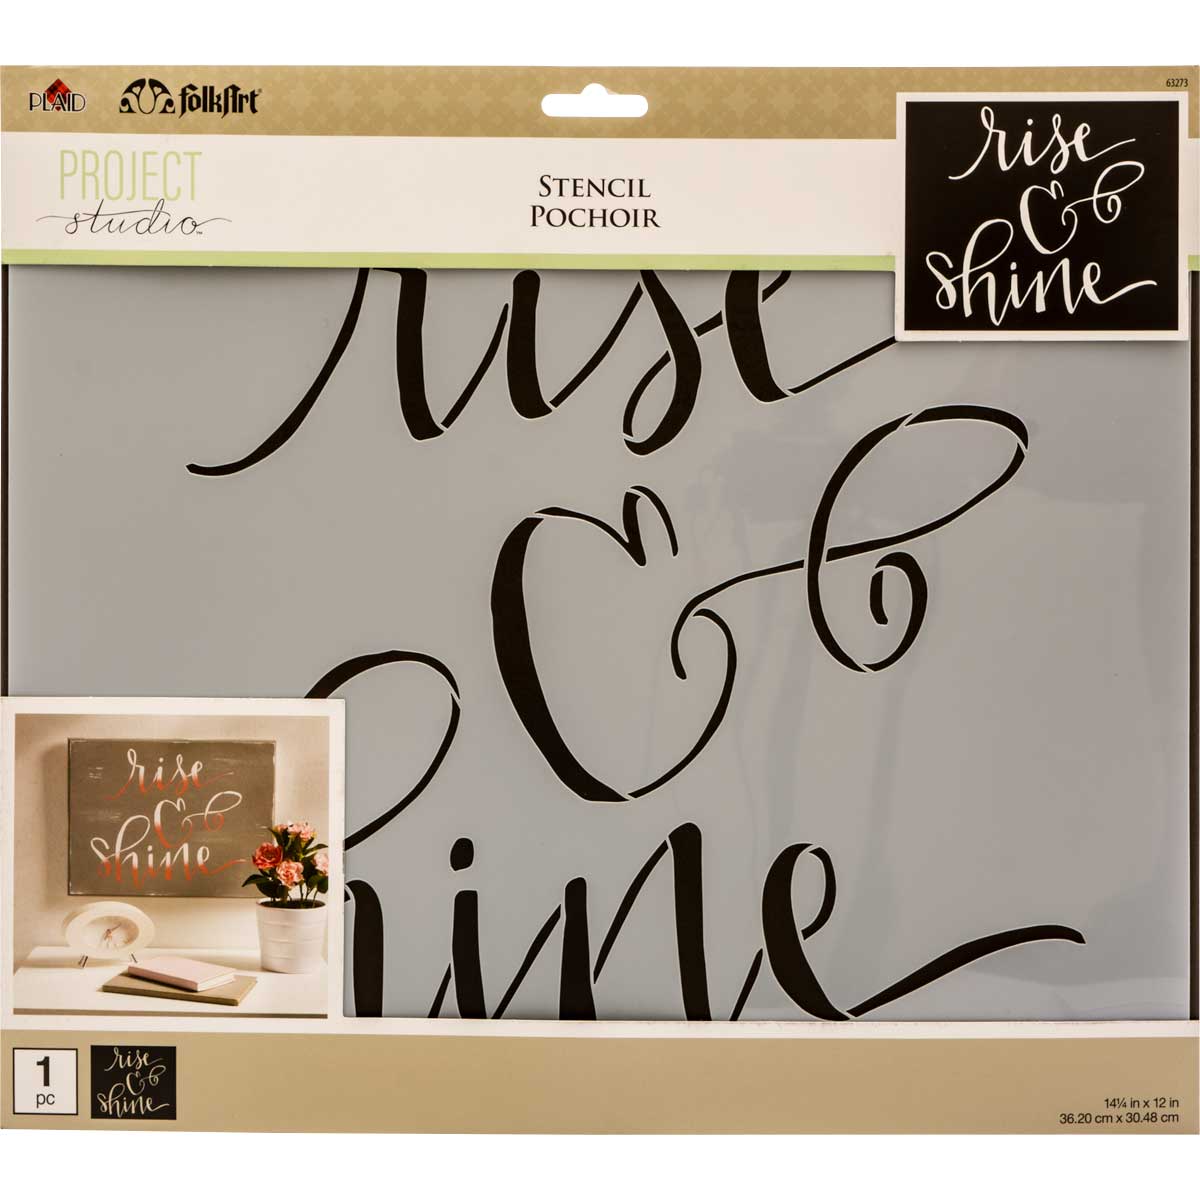 FolkArt ® Painting Stencils - Sign Making - Project Studio™ Rise & Shine - 63273